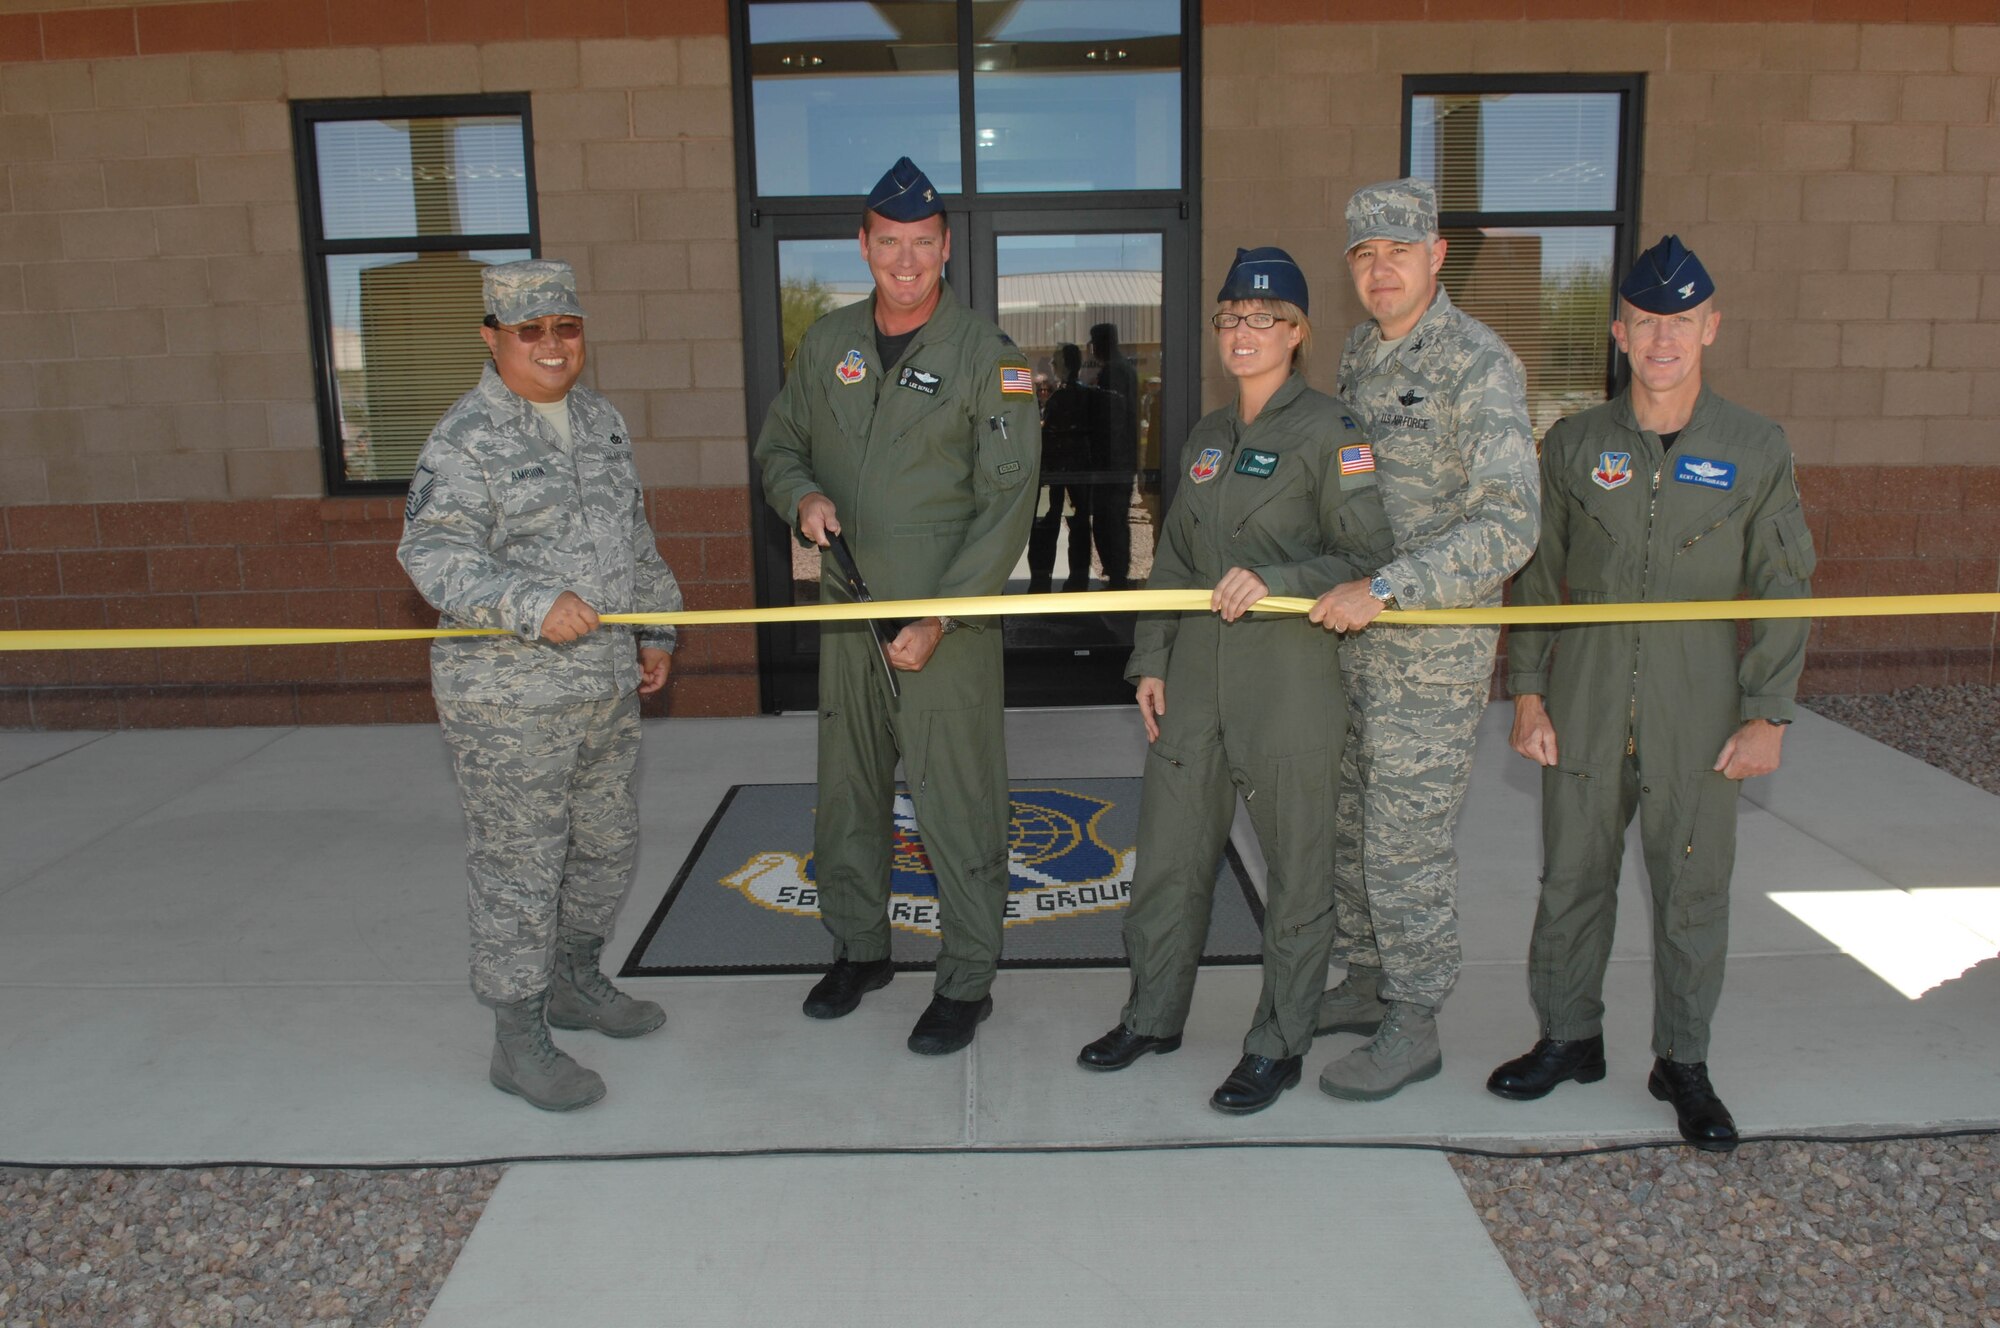 Master Sgt. Joel Ambion, 355th Civil Engineer Squadron, Col.  Lee DePalo, 563rd Rescue Group commander, Capt. Carrie Dally, 563rd Operations Support Squadron,  Col. Kenneth Todorov, 23rd Wing commander, and Col. Kent Laughbaum 355th Fighter Wing commander, cut the ribbon for the new 563rd Group building here on May 30, 2008.  This new building will be used by the 563rd Maintenance Squadron, 563rd Operations Support Squadron, 48th Rescue Squadron, 55th Rescue Squadron, and the 79th Rescue Squadron.  The mission of these different squadrons is to be successful in flying operations and ensuring the combat search and rescue can be successful in saving lives.  (US Air Force Photo By: Senior Airman Jacqueline Hawkins)